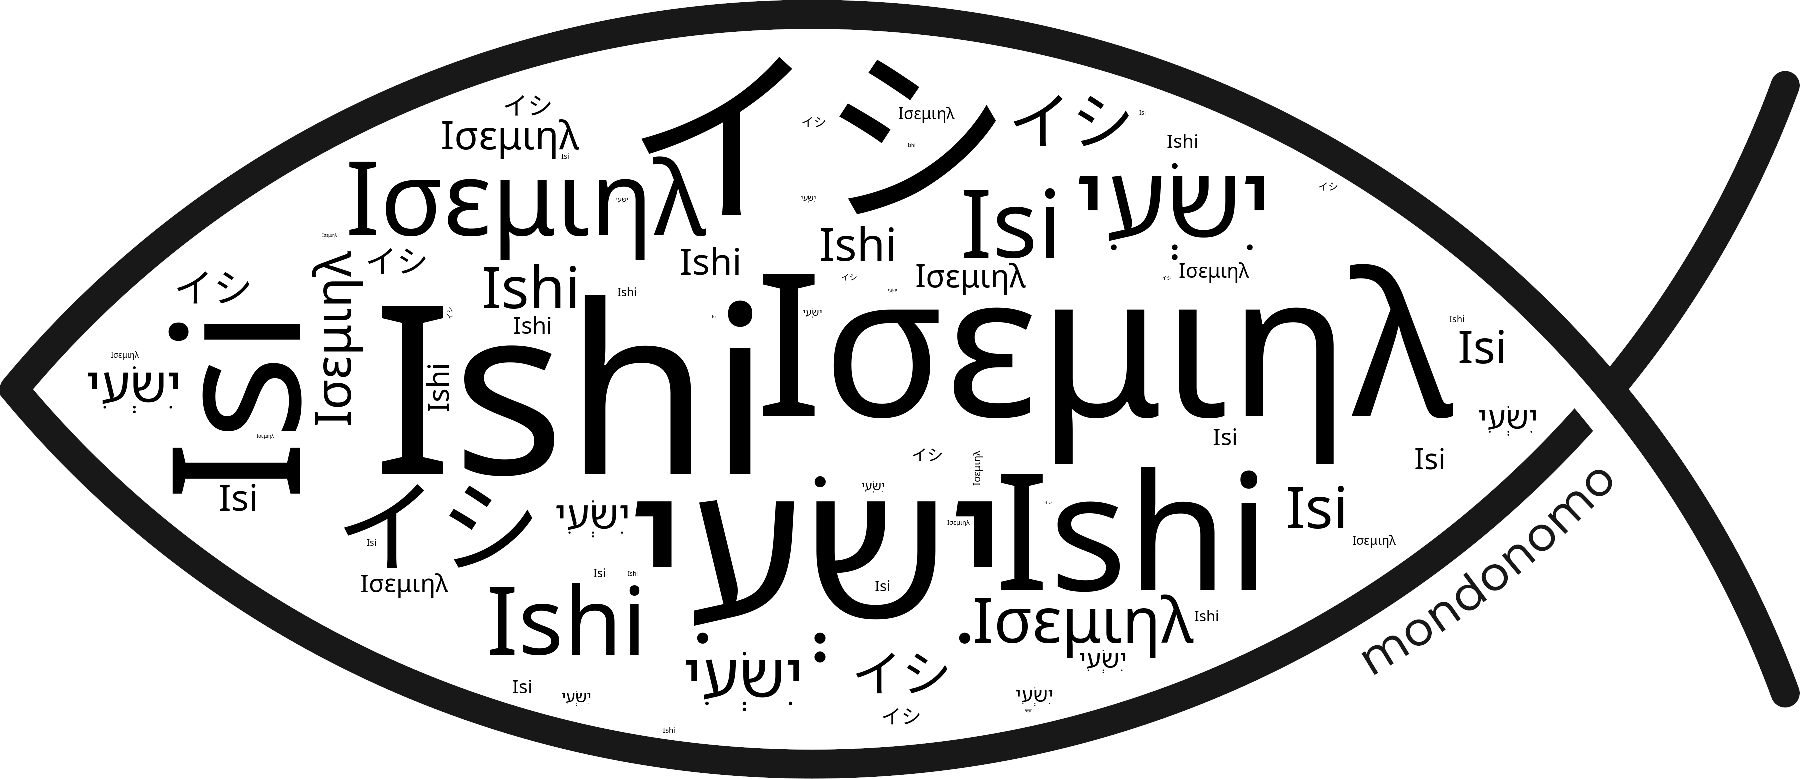 Name Ishi in the world's Bibles